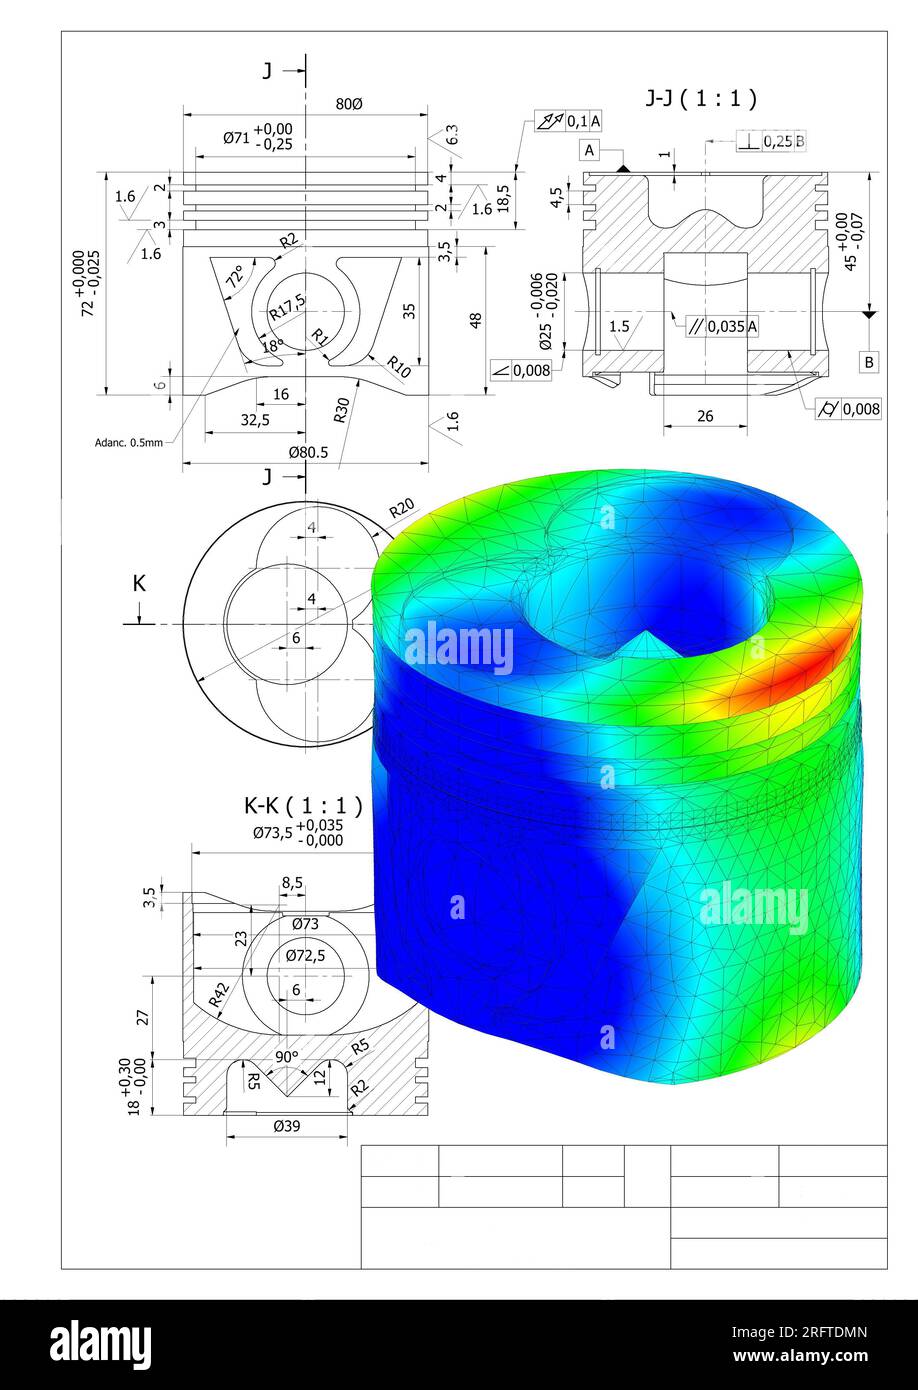 finite element method, FEM, analysis and Engineering Technical Drawing Graphics of a piston from a combustion engine in a car Stock Photo